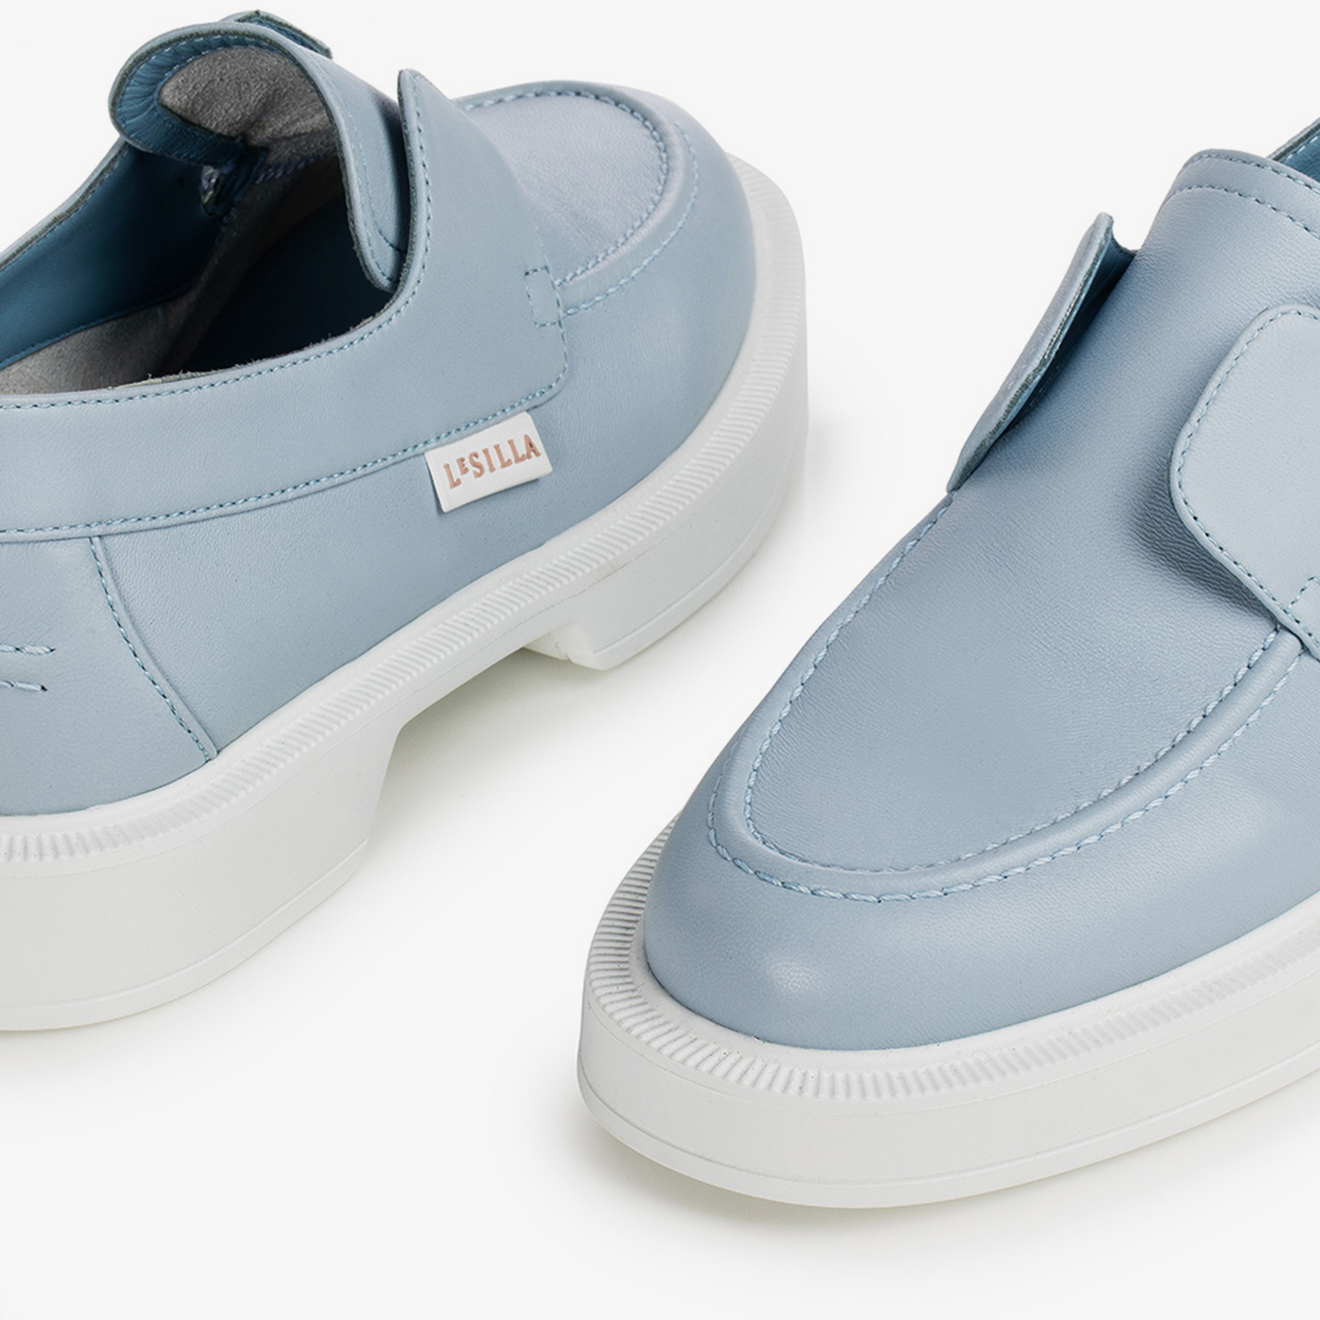 YACHT LOAFER - Le Silla official outlet